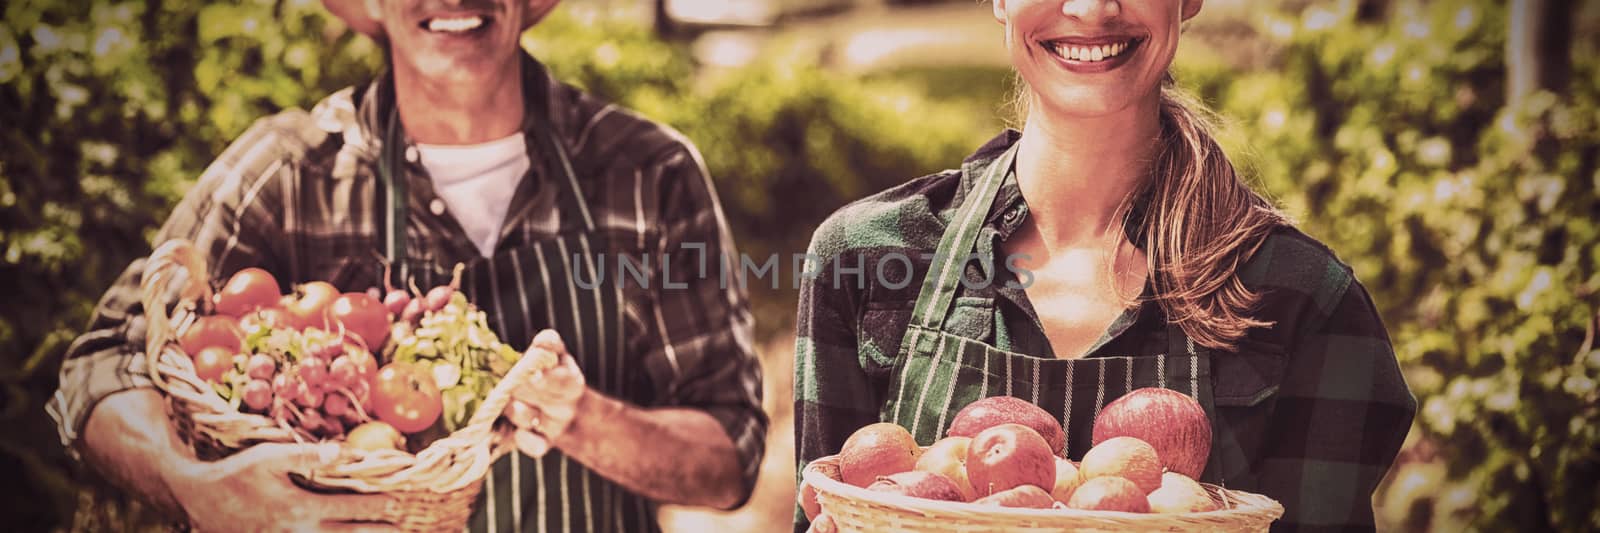 Portrait of happy farmer couple holding baskets of vegetables and fruits by Wavebreakmedia